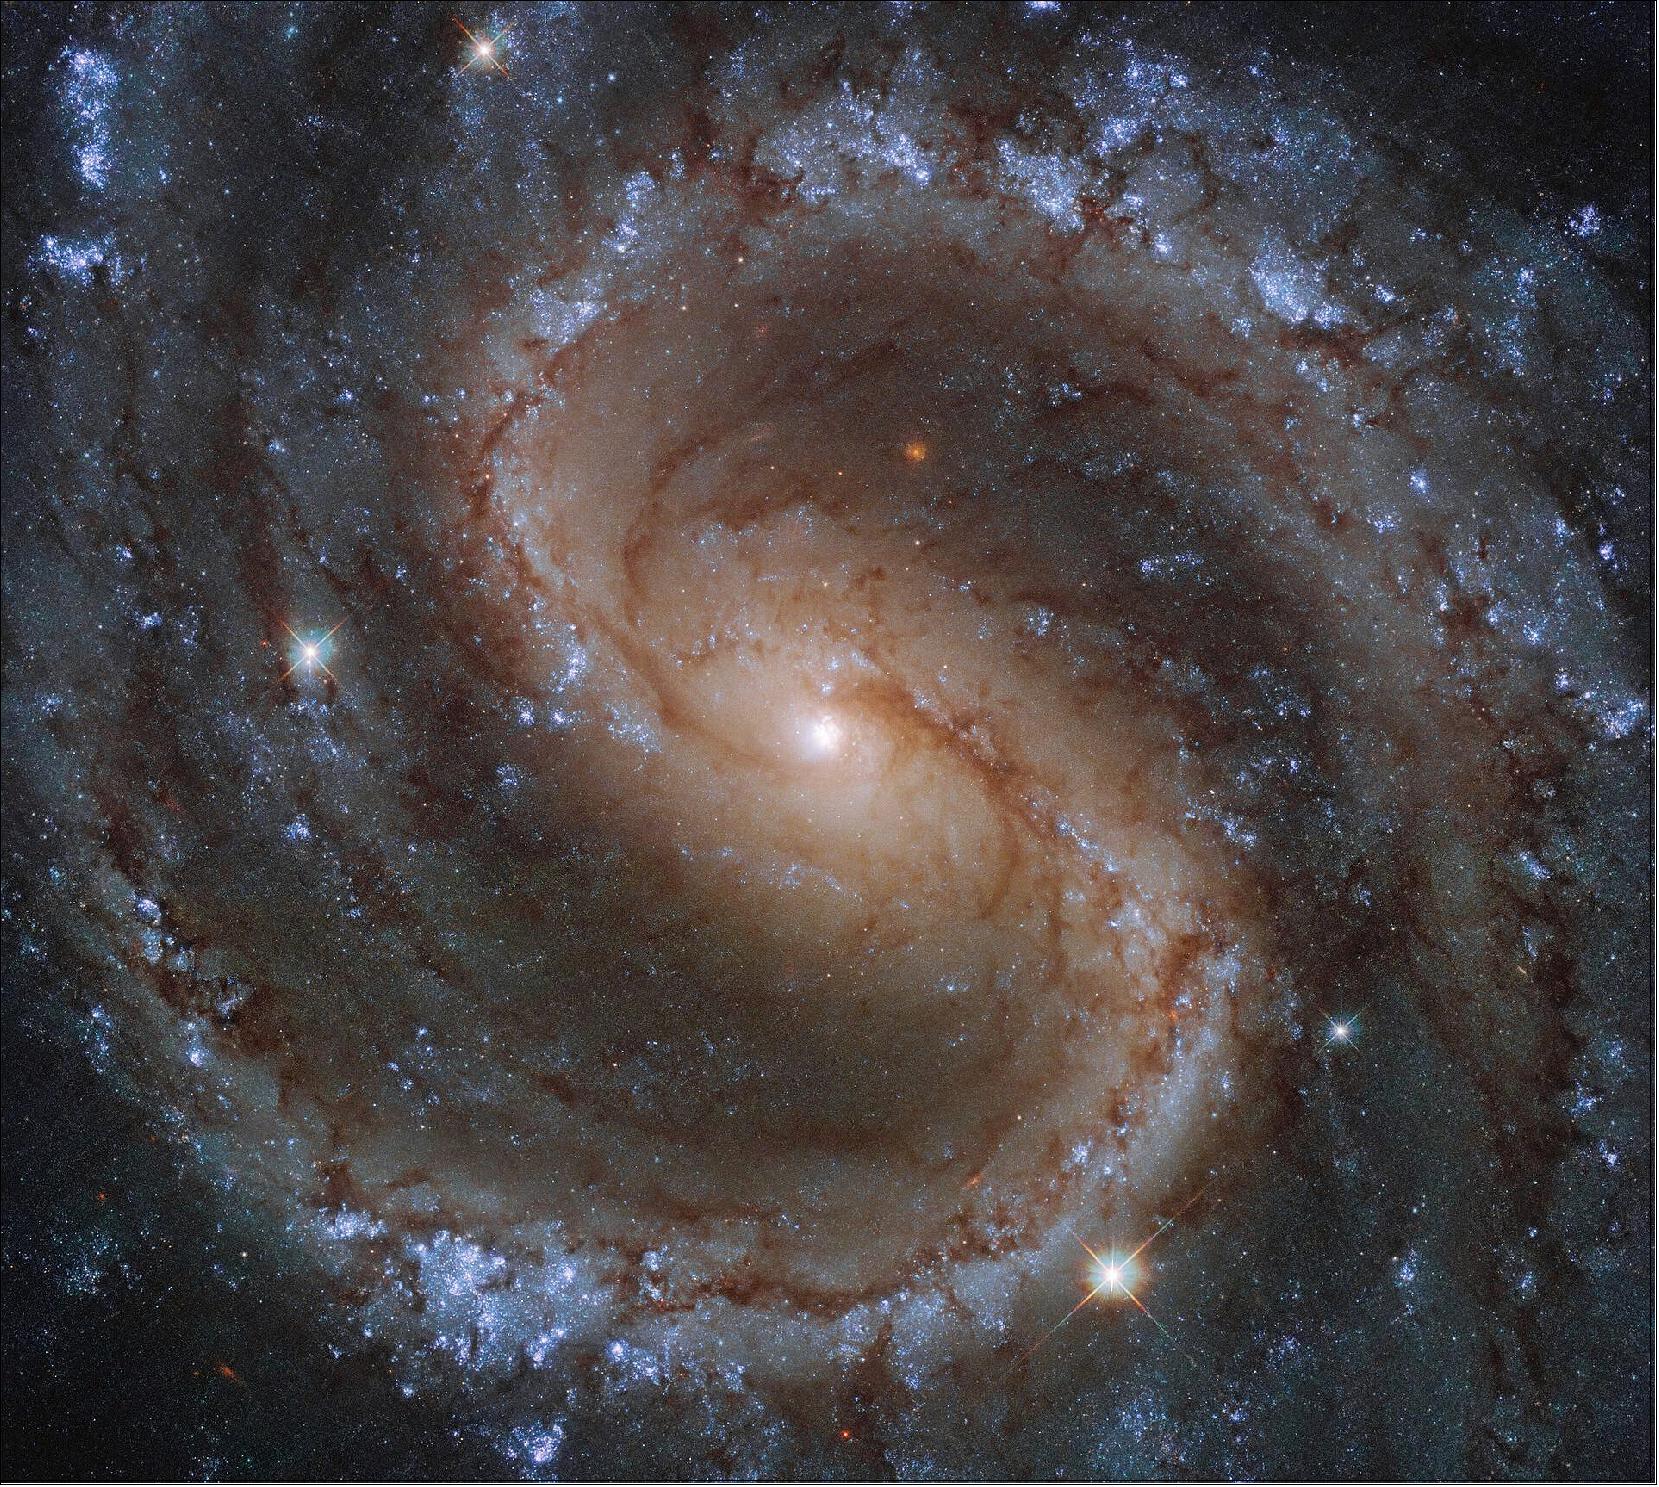 Figure 120: The bright colors in this image aren't just beautiful to look at, as they actually tell us about the population of stars within this barred spiral galaxy. The bright blue-ish colors, seen nestled amongst NGC 4535's long, spiral arms, indicate the presence of a greater number of younger and hotter stars. In contrast, the yellower tones of this galaxy's bulge suggest that this central area is home to stars which are older and cooler (image credit: ESA/Hubble & NASA, J. Lee and the PHANGS-HST Team; CC BY 4.0)